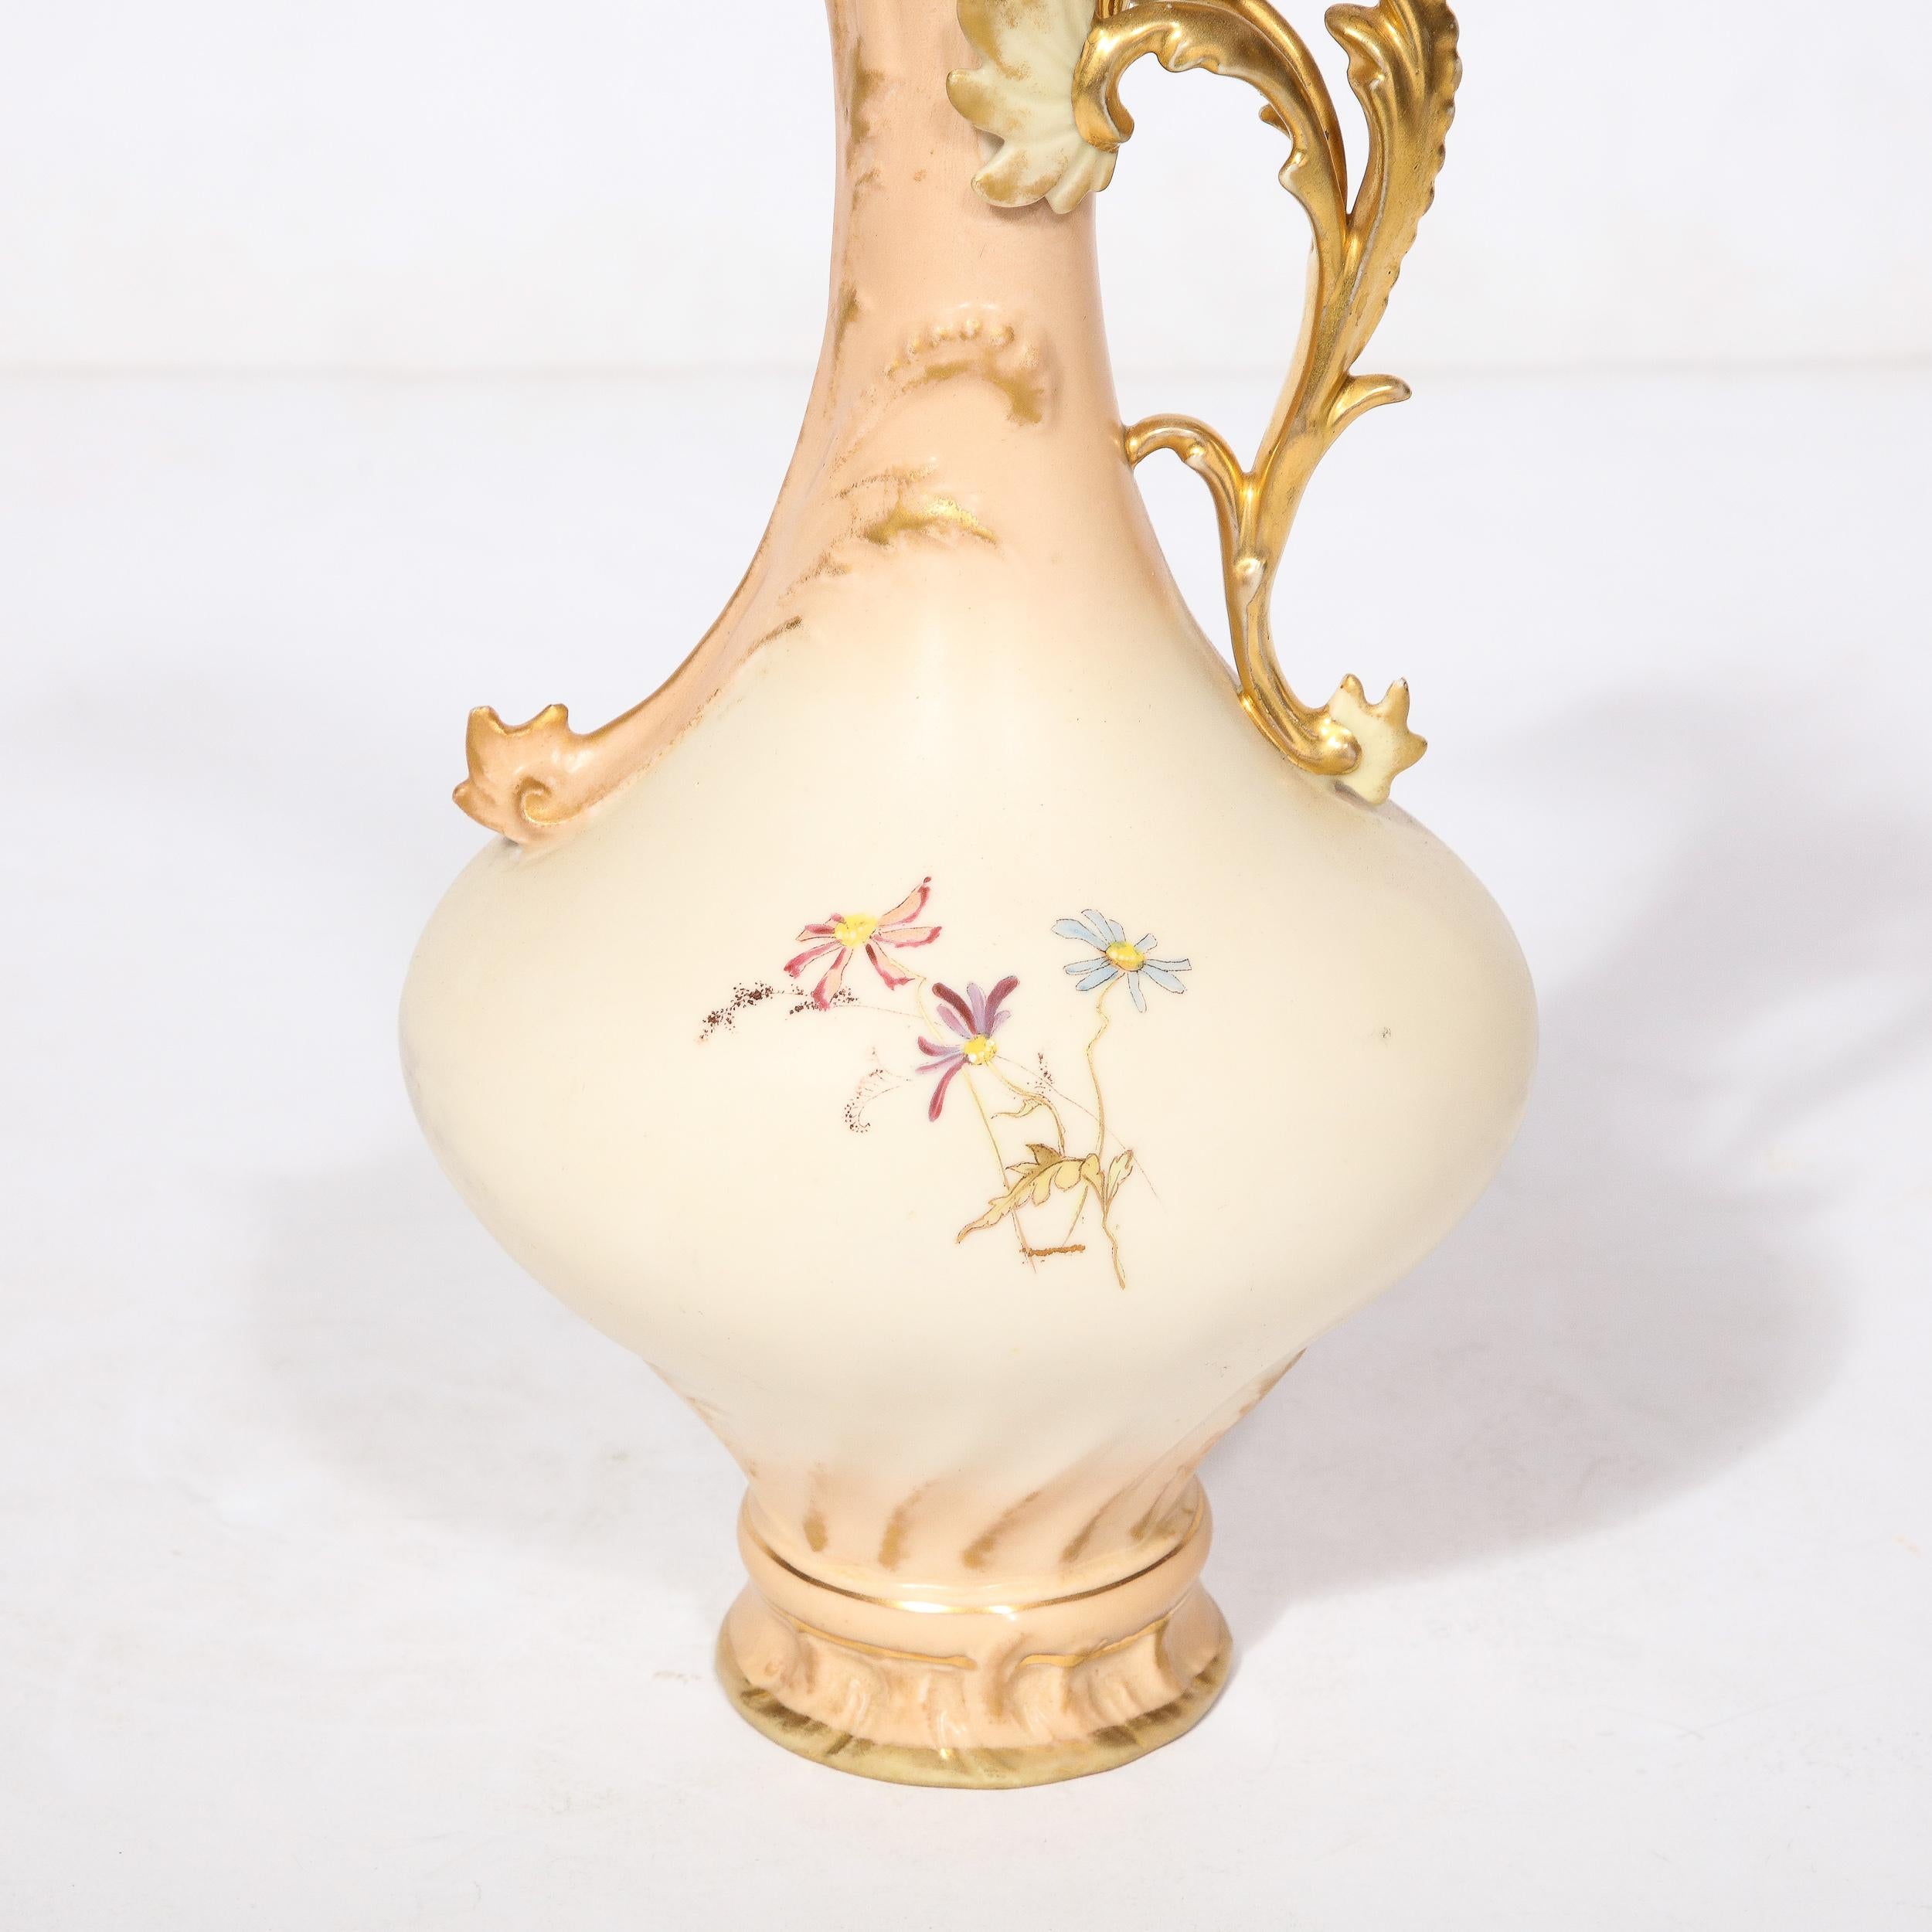 Austrian Antique Hand Painted Neoclassical Porcelain Vase by A. Stowell Boston For Sale